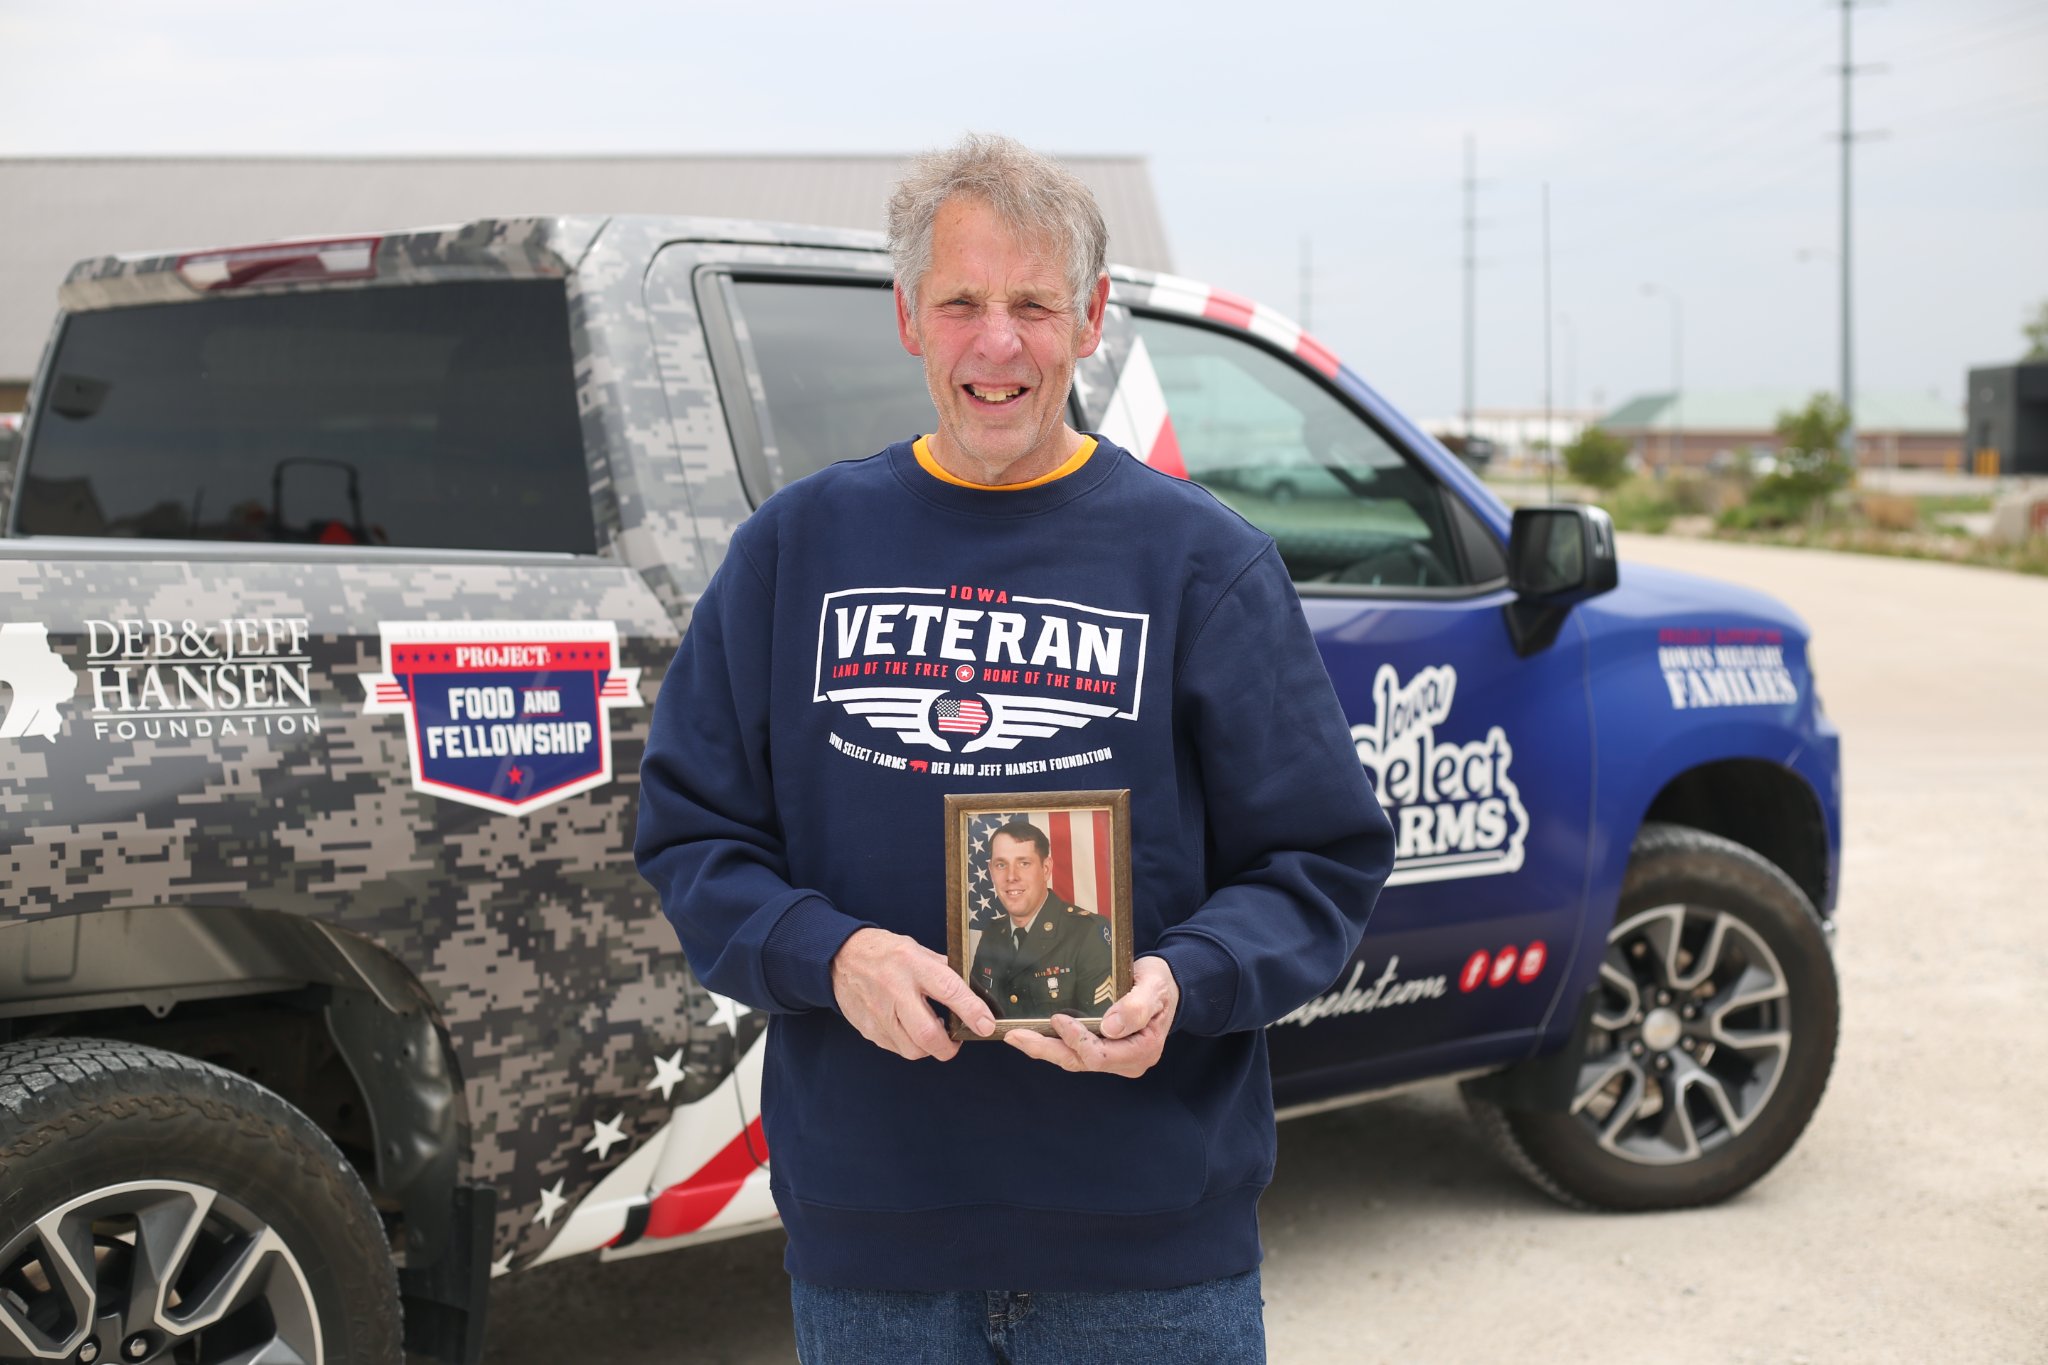 Randy holding a picture of himself while active duty by the truck